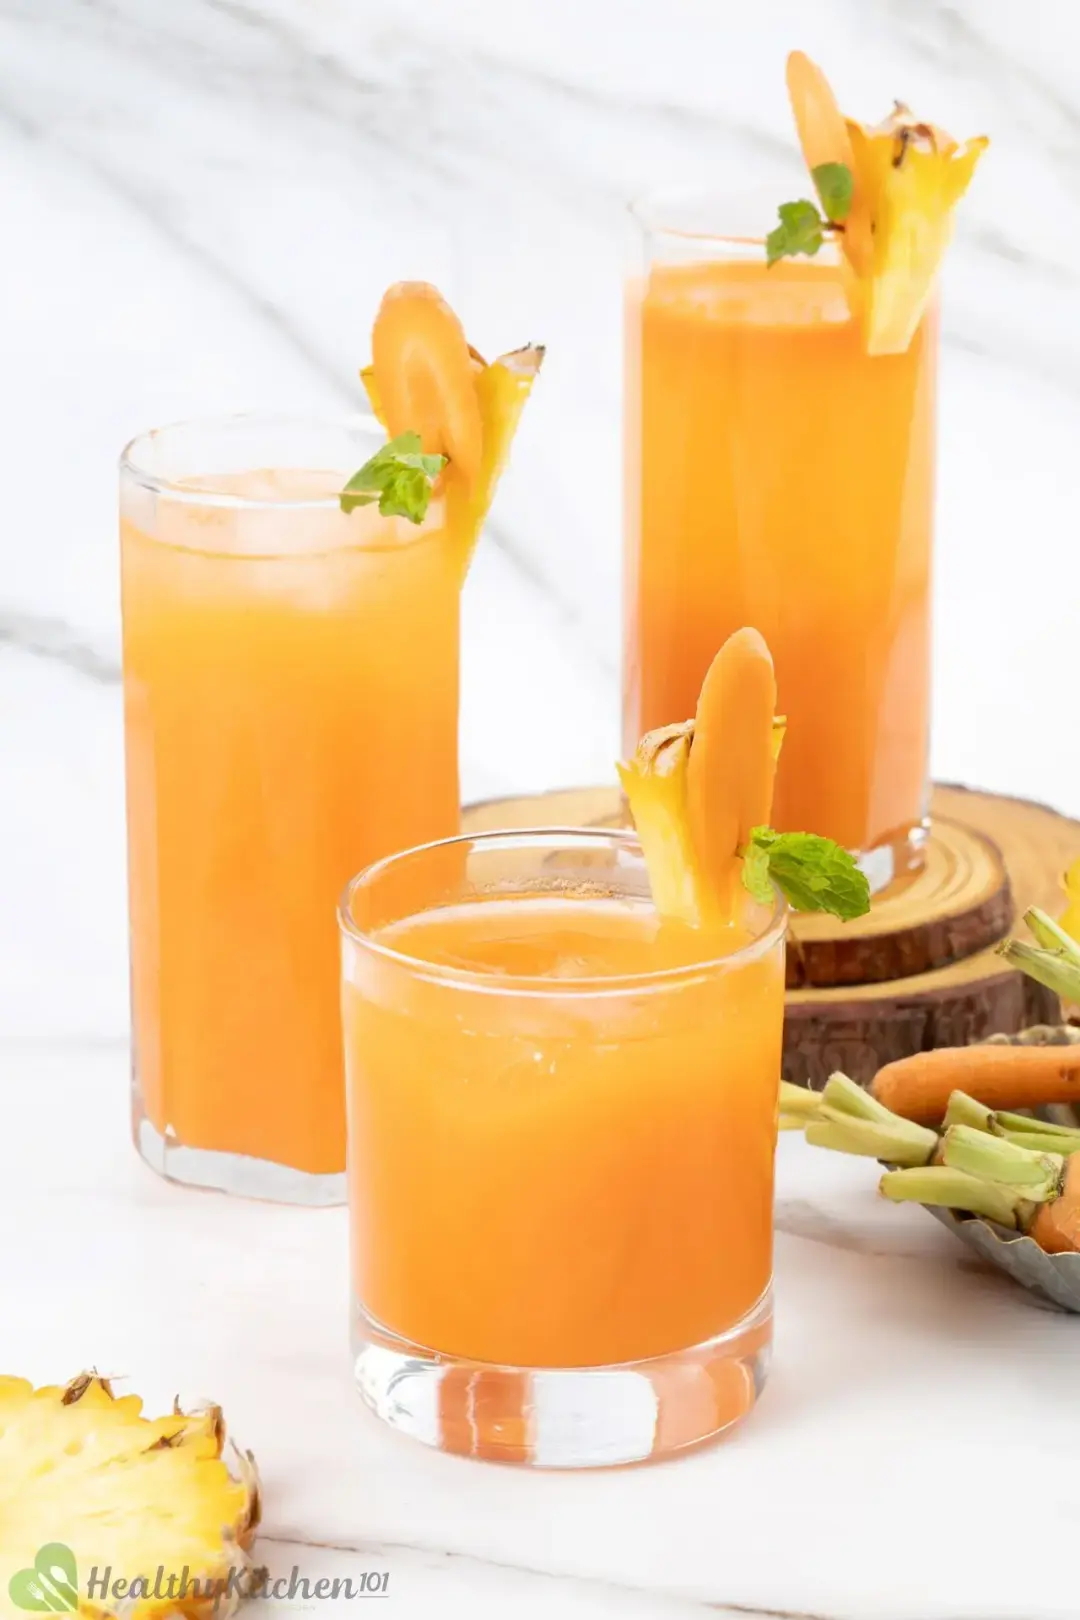 Three glasses of pineapple orange carrot juice of different sizes garnished with carrot slices pineapple wedges and baby carrots